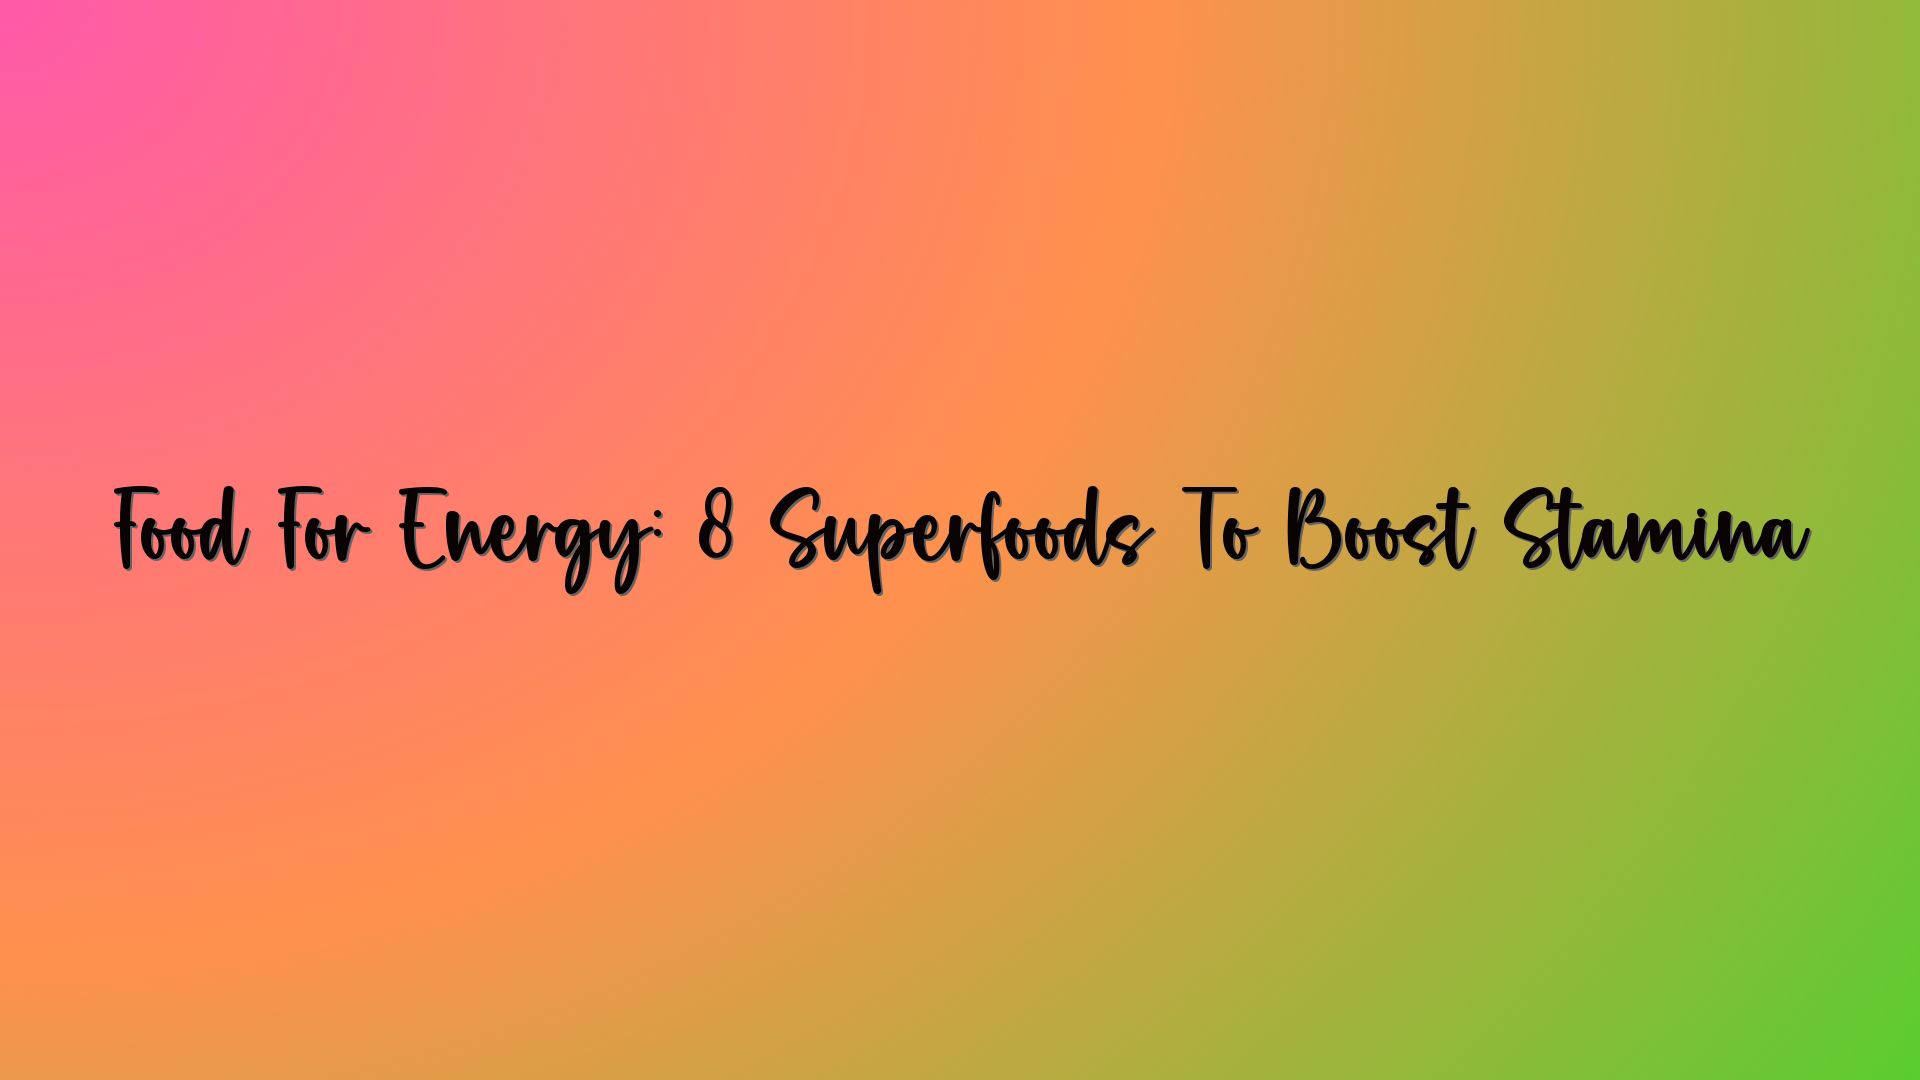 Food For Energy: 8 Superfoods To Boost Stamina